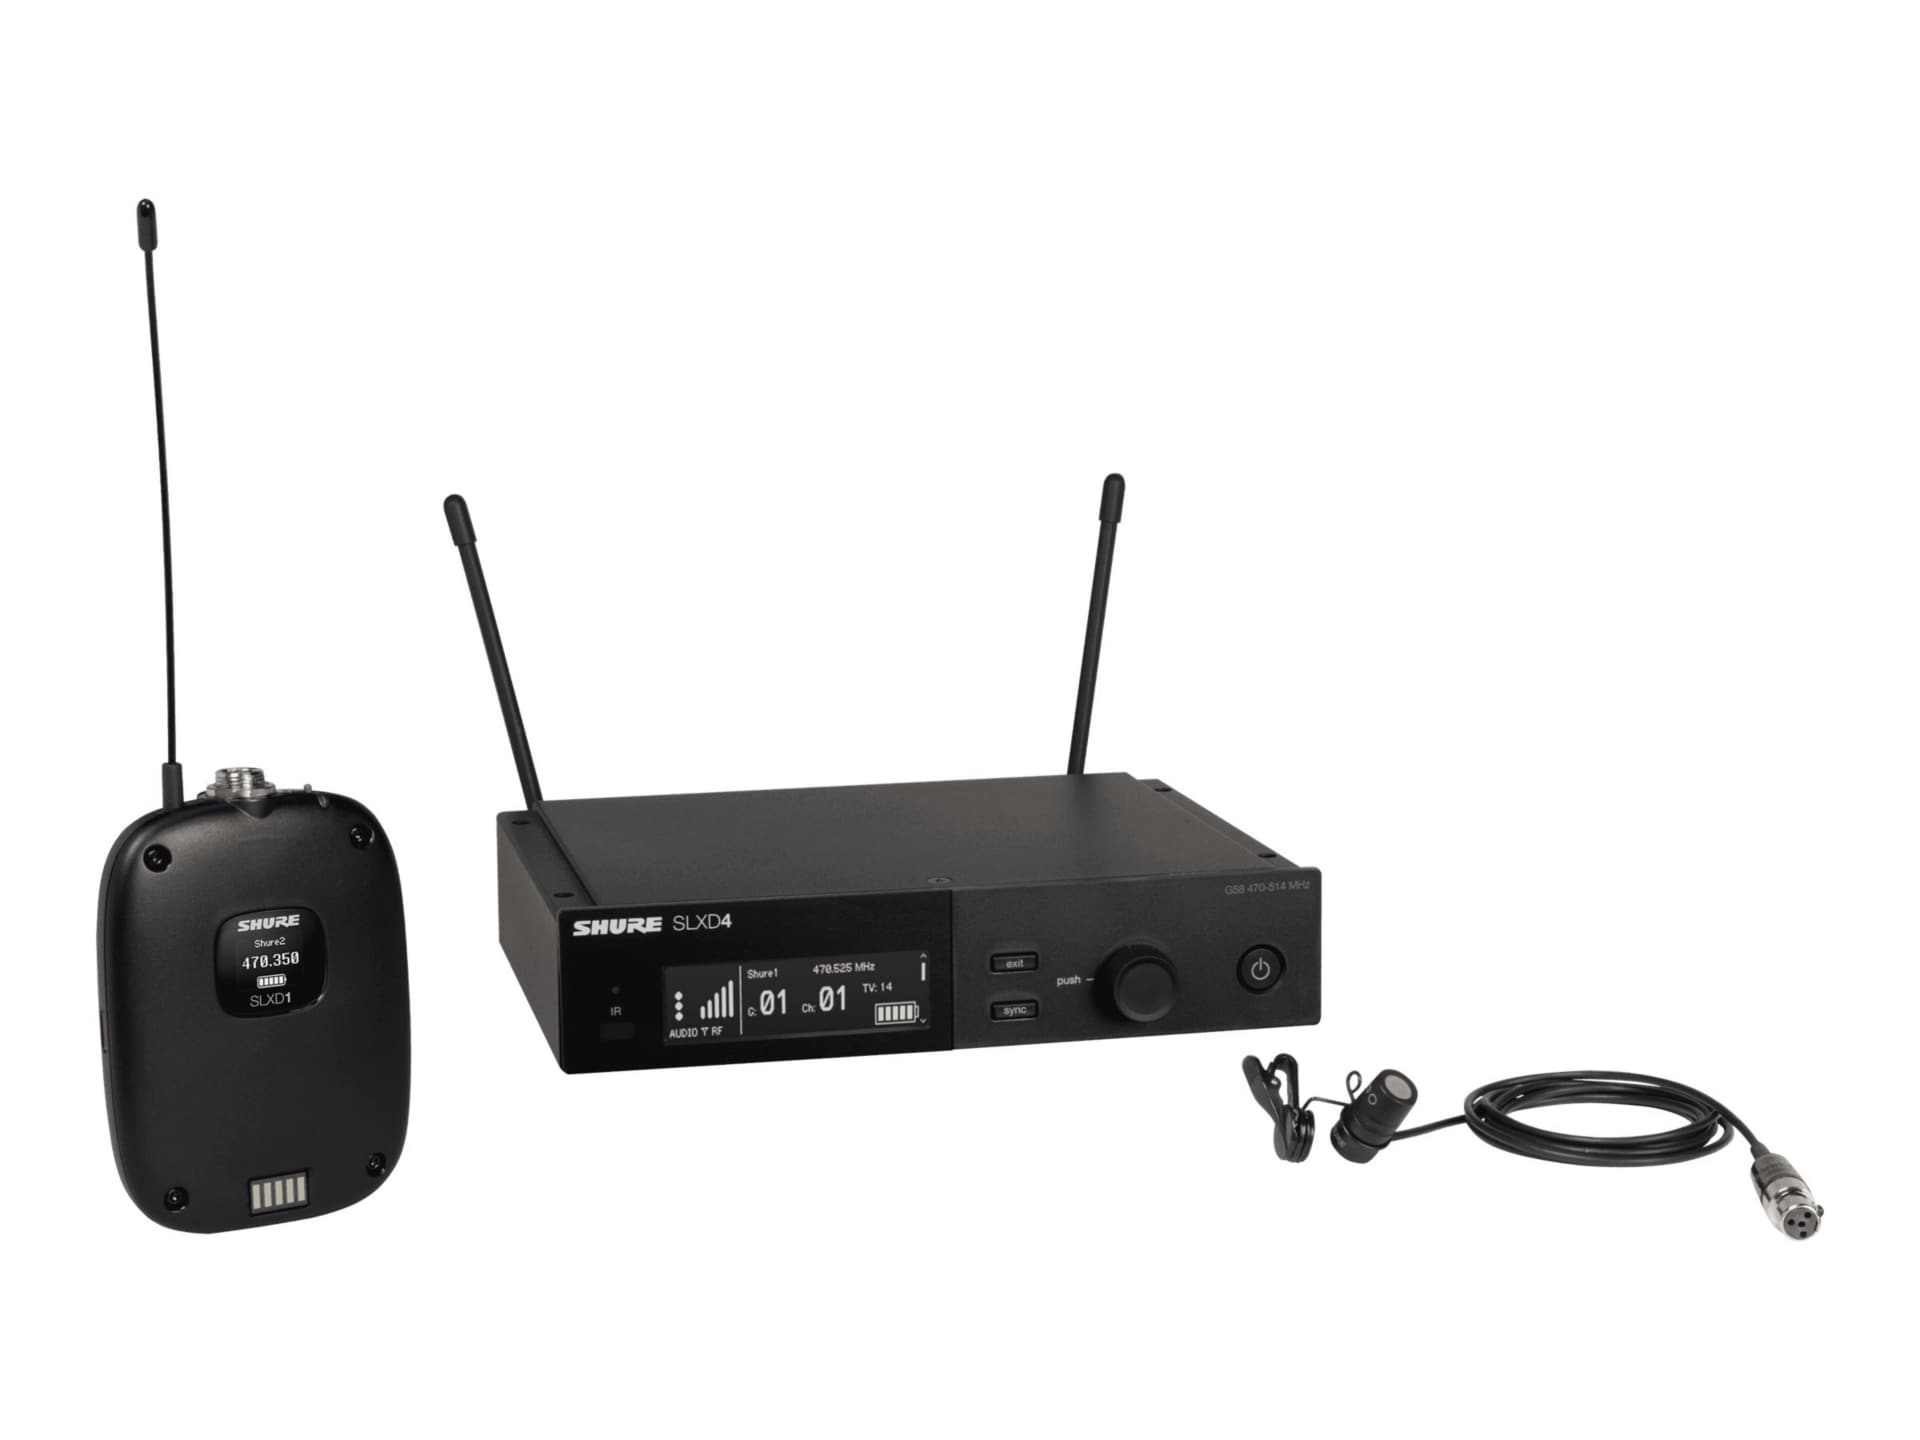 Shure SLX-D Wireless System SLXD14/85 - H55 Band - wireless microphone syst